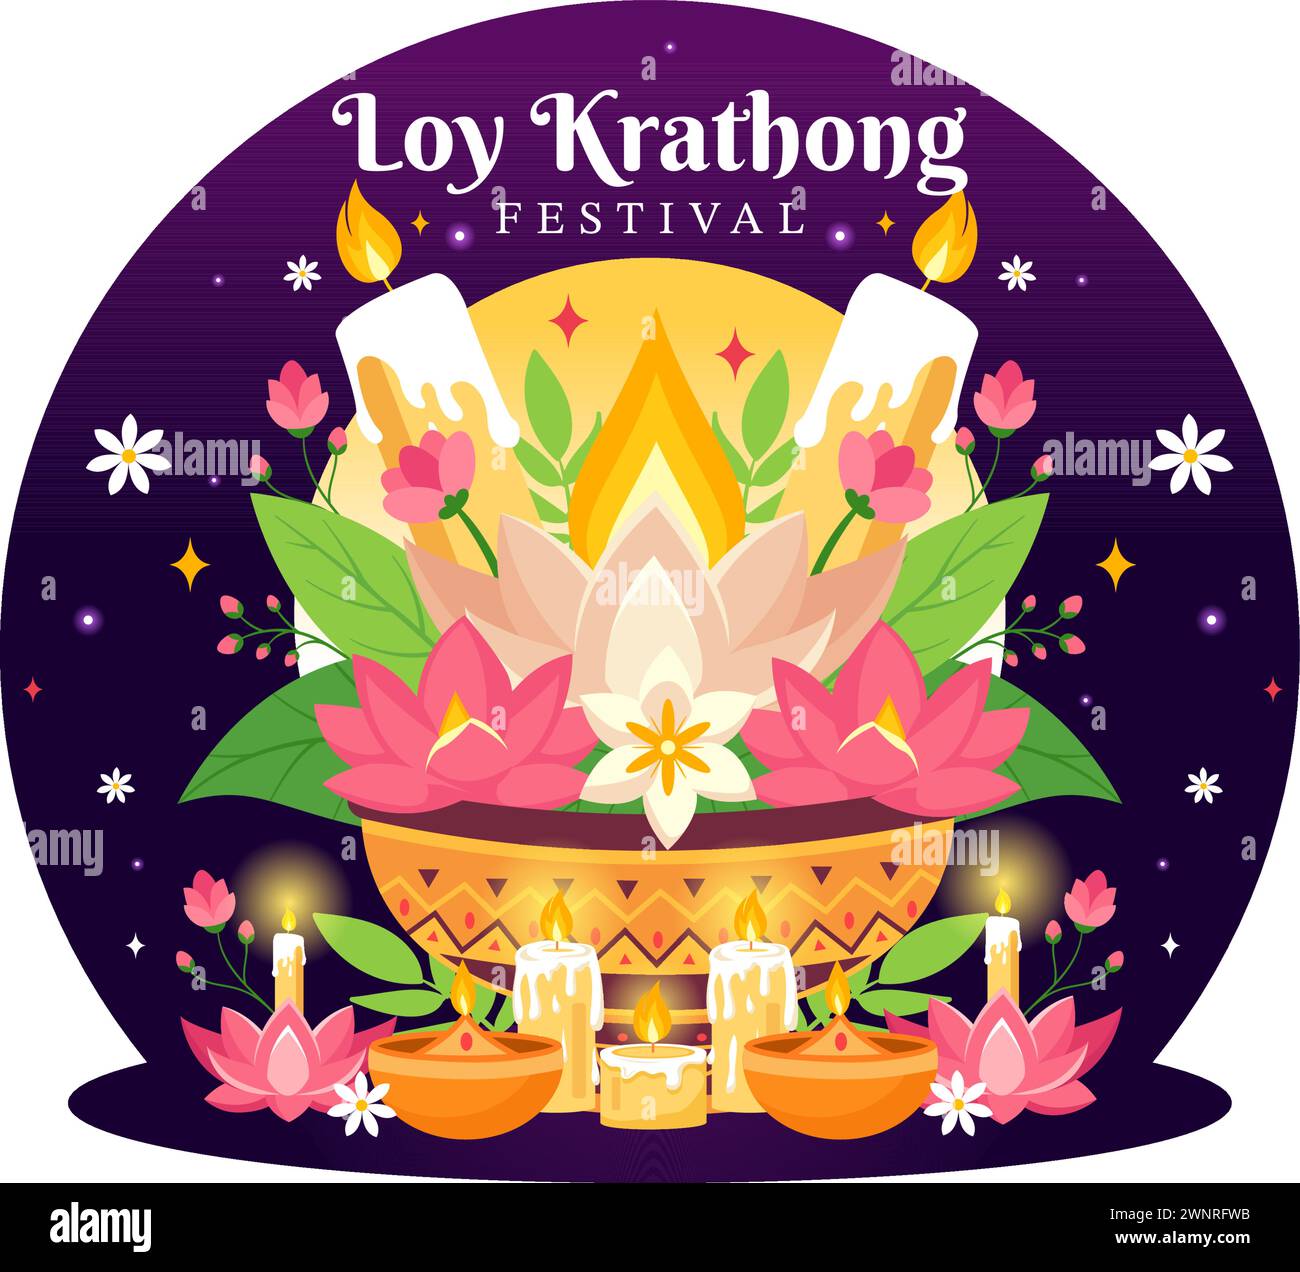 Loy Krathong Vector Illustration of Festival Celebration in Thailand with Lanterns and Krathongs Floating on Water Design in Flat Cartoon background Illustrazione Vettoriale